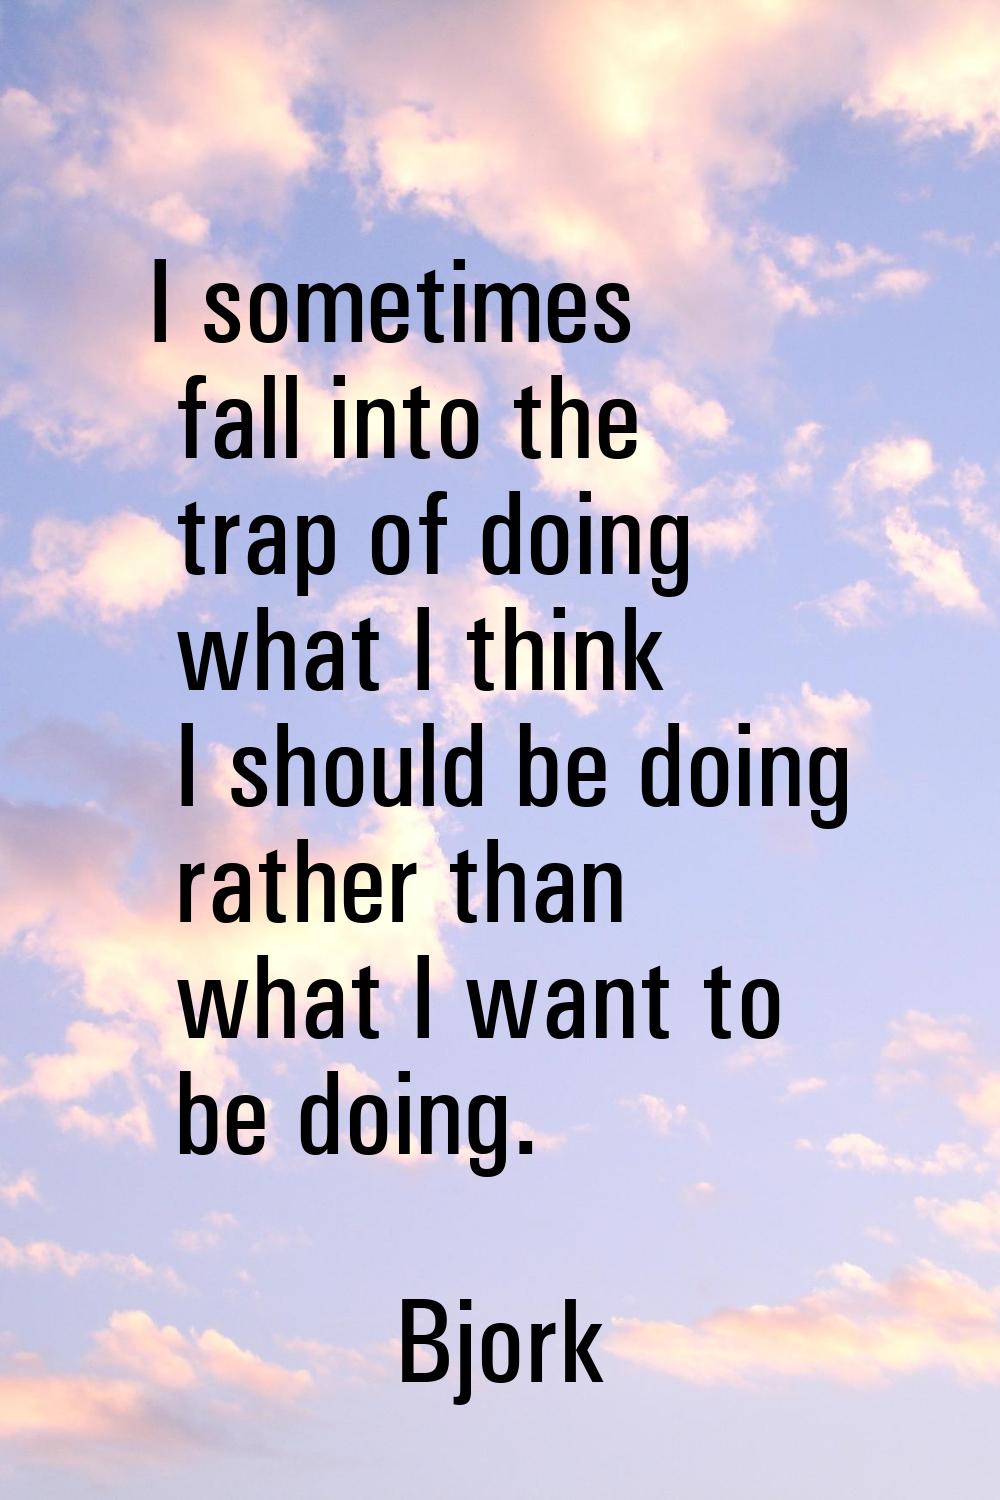 I sometimes fall into the trap of doing what I think I should be doing rather than what I want to b